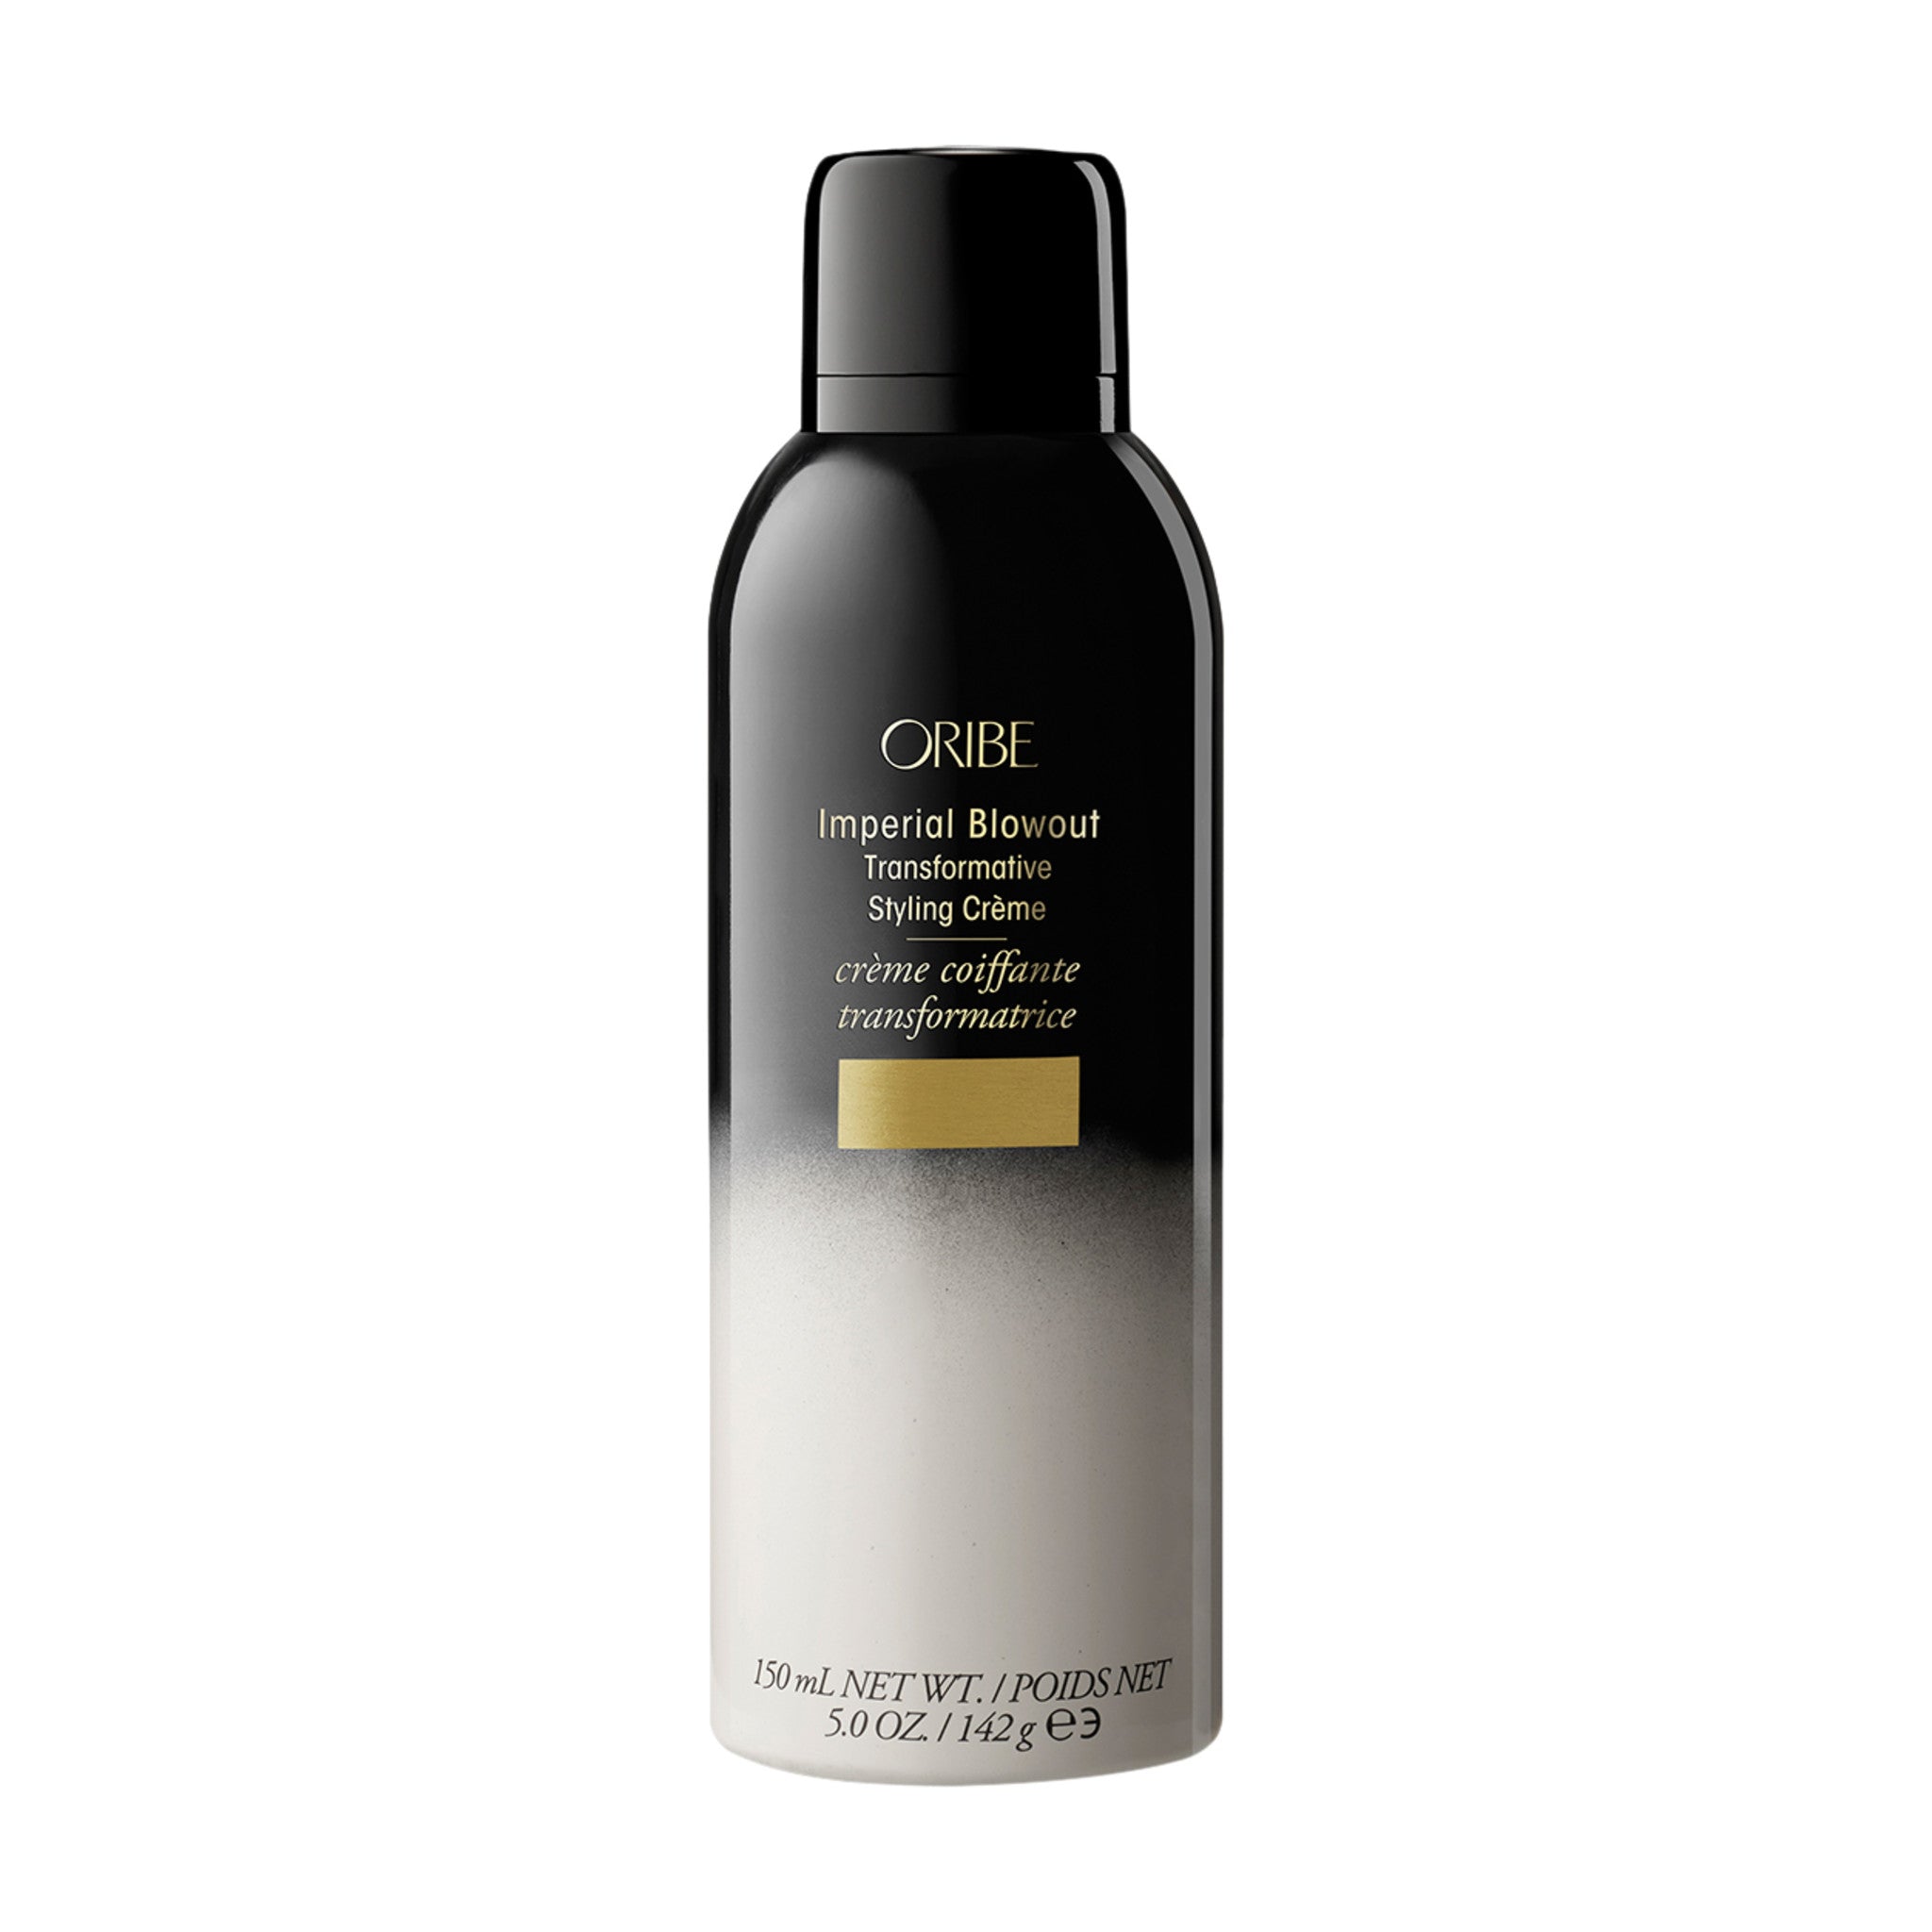 Oribe Imperial Blowout Transformative Styling Crème main image.